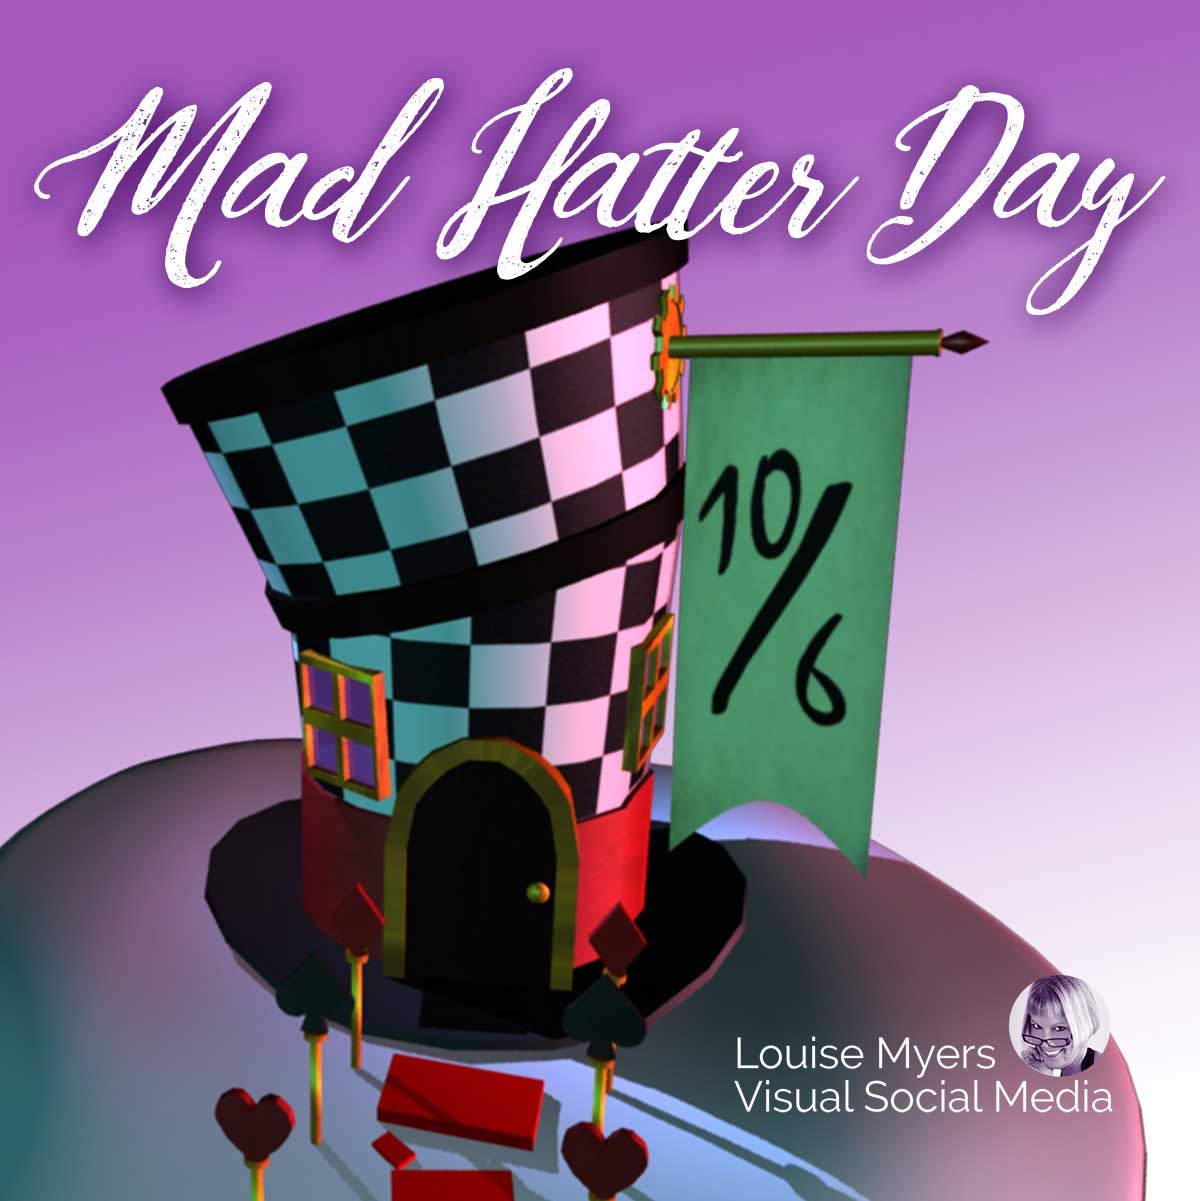 whimsical illustration of checkerboard top hat with 10/6 label says mad hatter day.